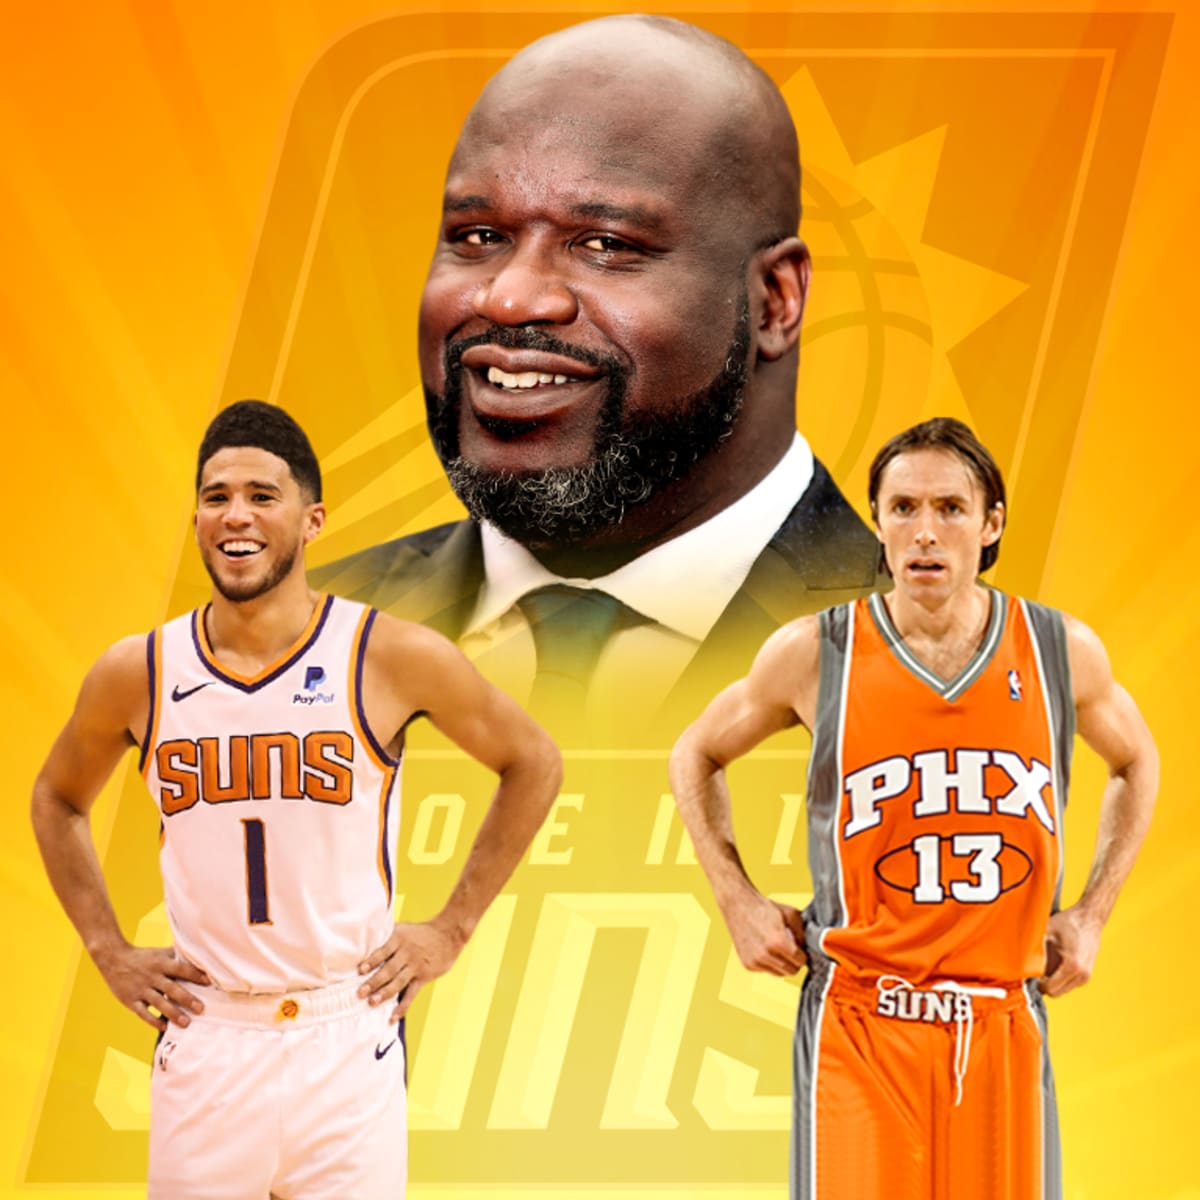 Dime on X: The Suns got a good one in Devin Booker. Steve Nash is